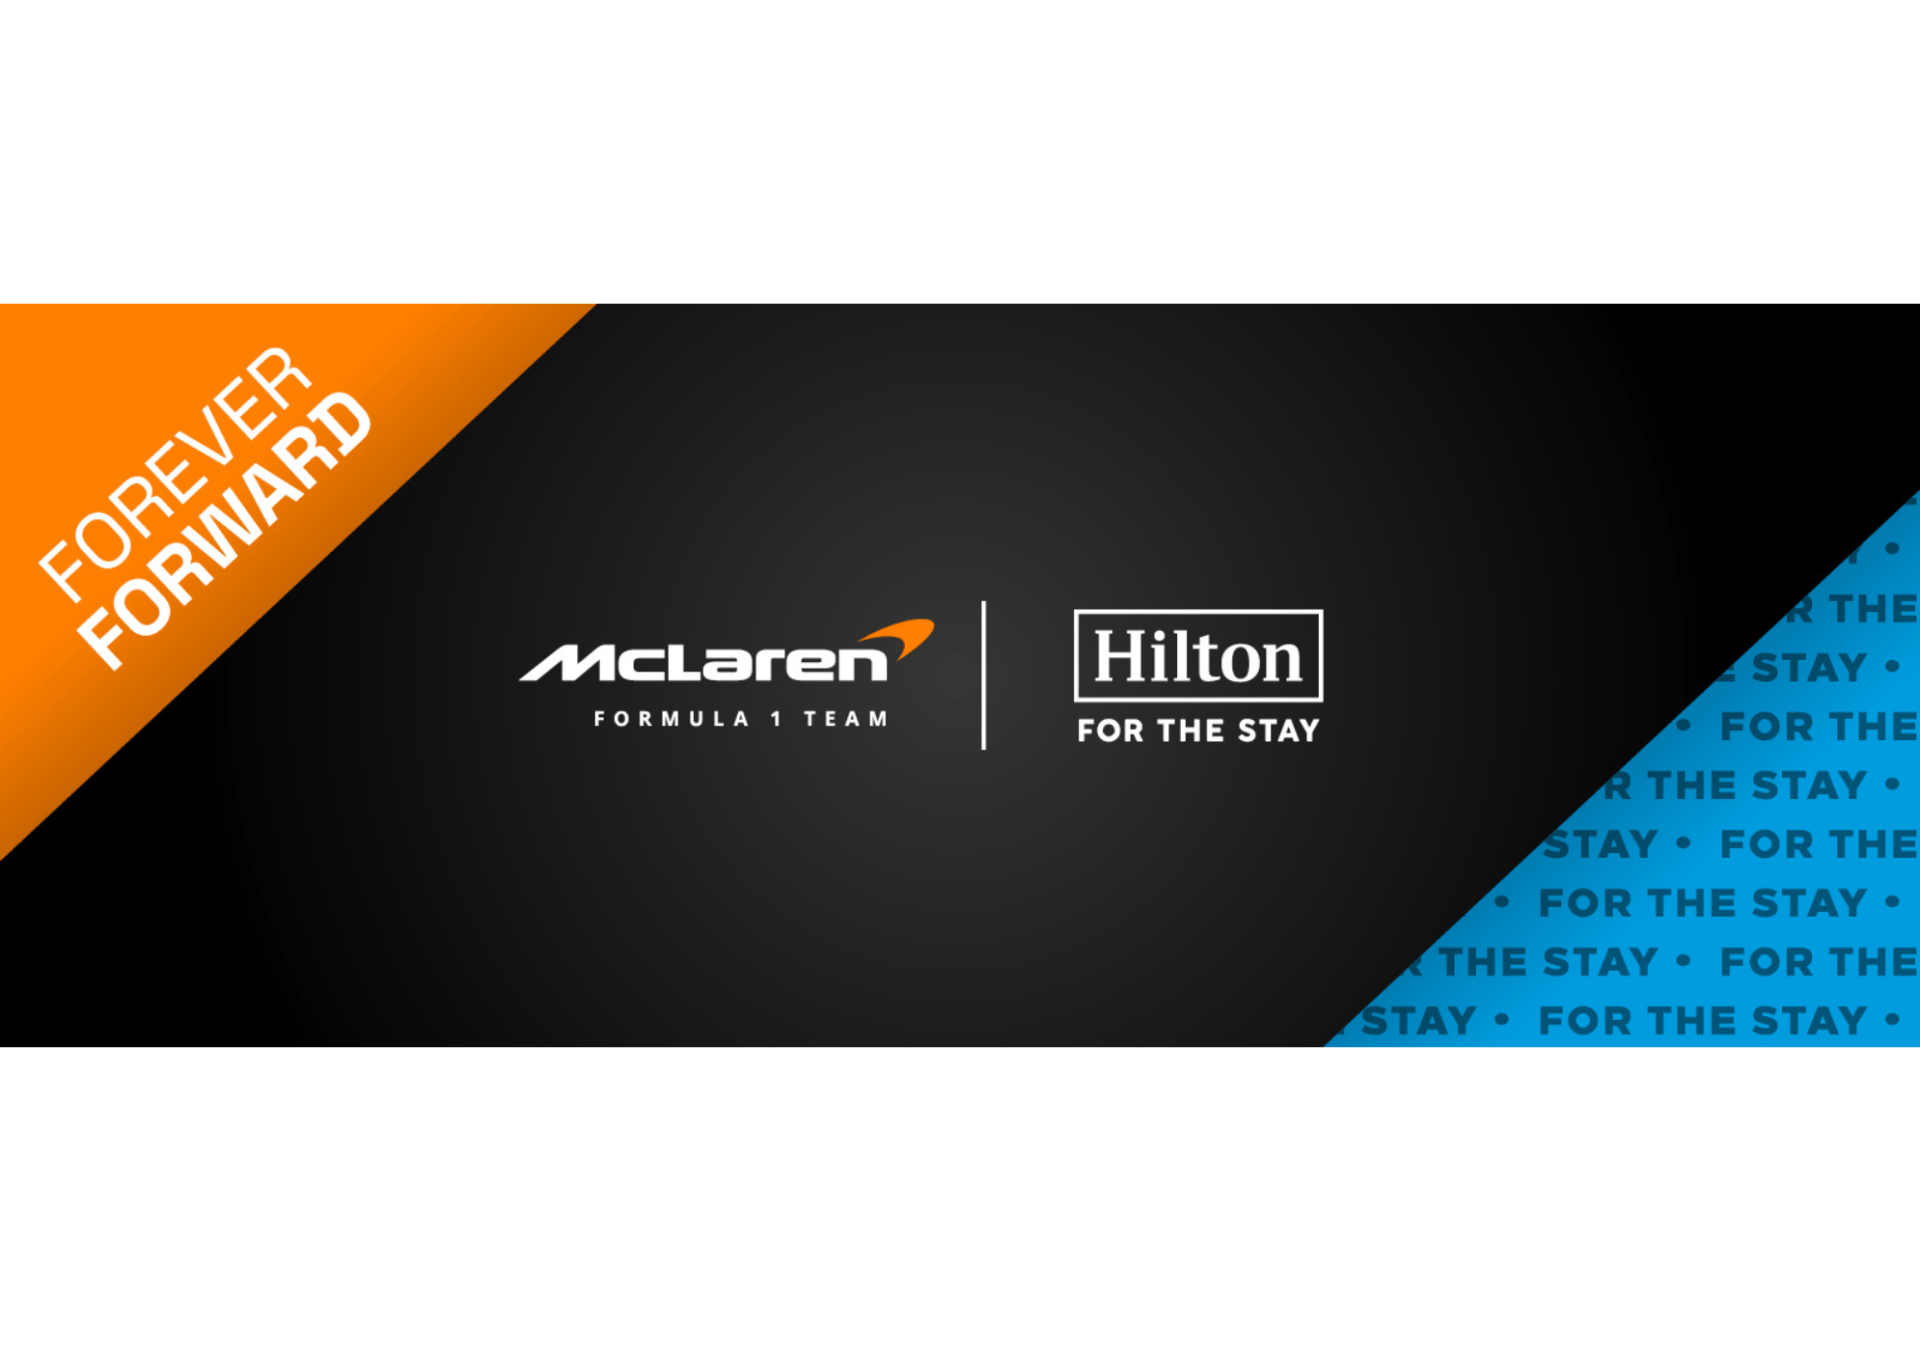 Forever Forward: McLaren Formula 1 Team and Hilton. For the Stay